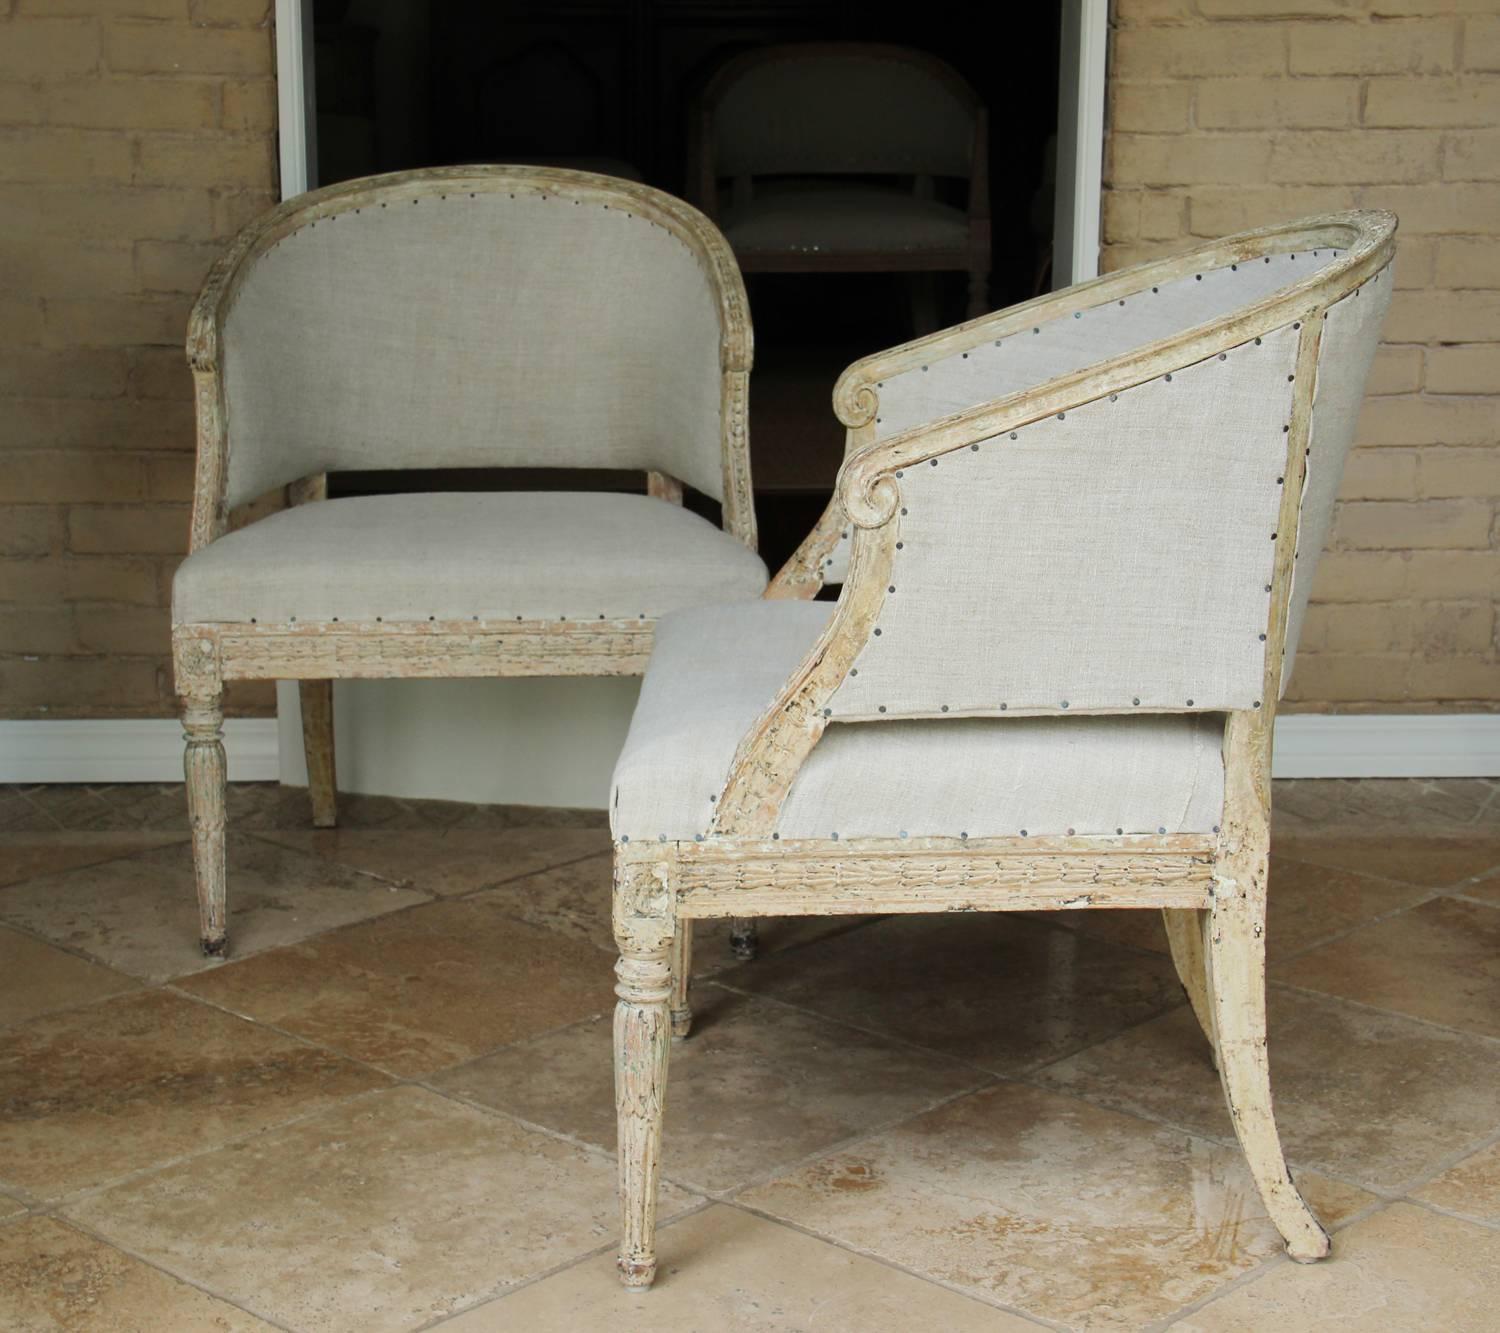 A pair of Swedish Gustavian period armchairs in original paint with barrel backs. These comfortable chairs have been newly upholstered in antique French linen. There is laurel leaf carved molding along the back frame ending in subtle scroll arms.